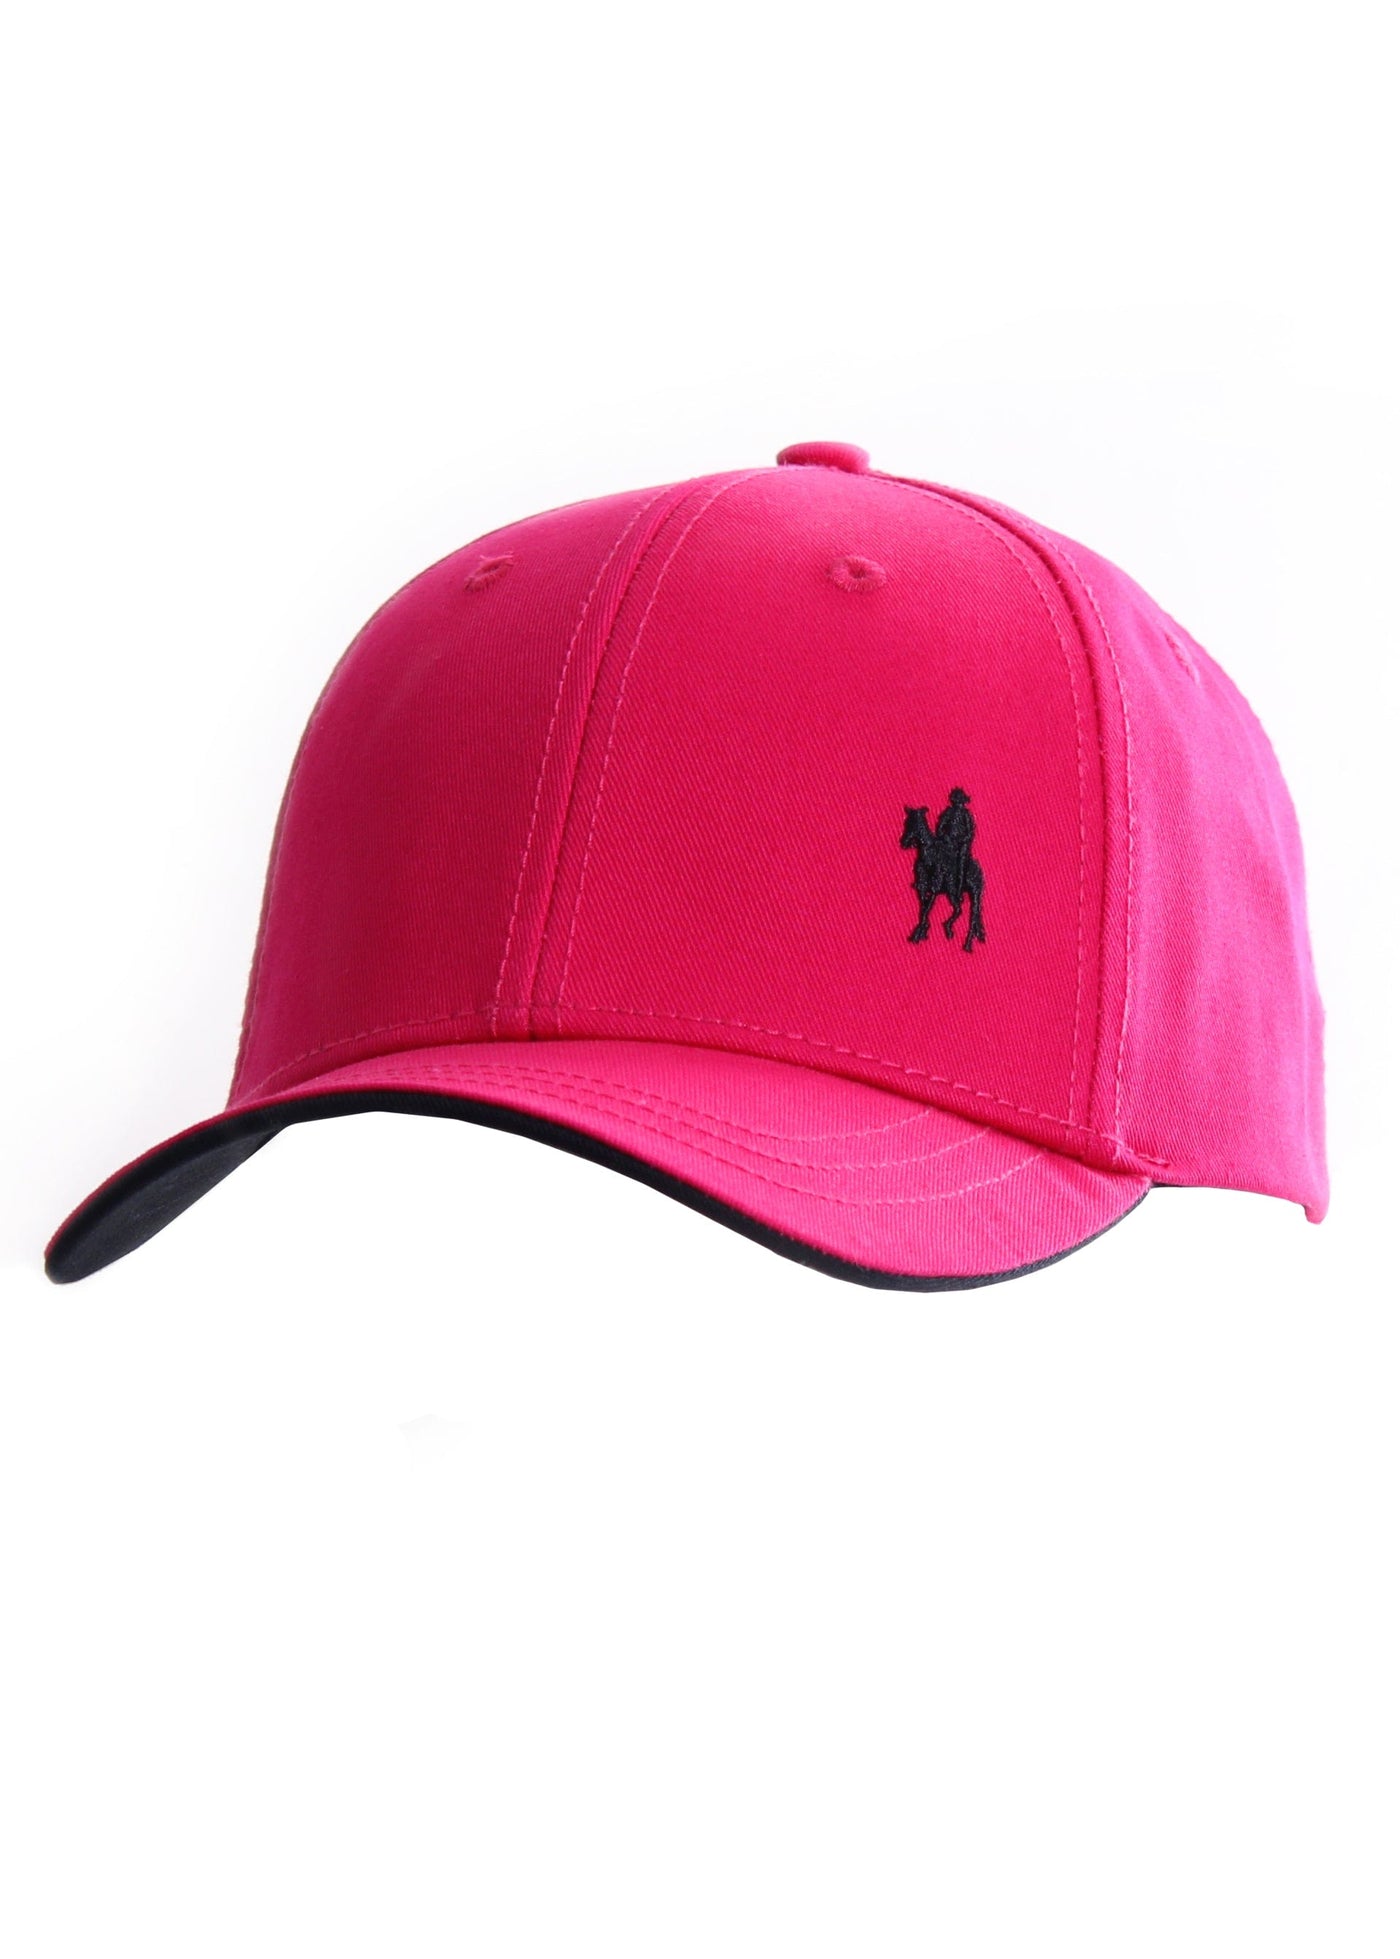 THOMAS COOK BOOTS AND CLOTHING CAP T9S7901CAP Kids Cap | Pink